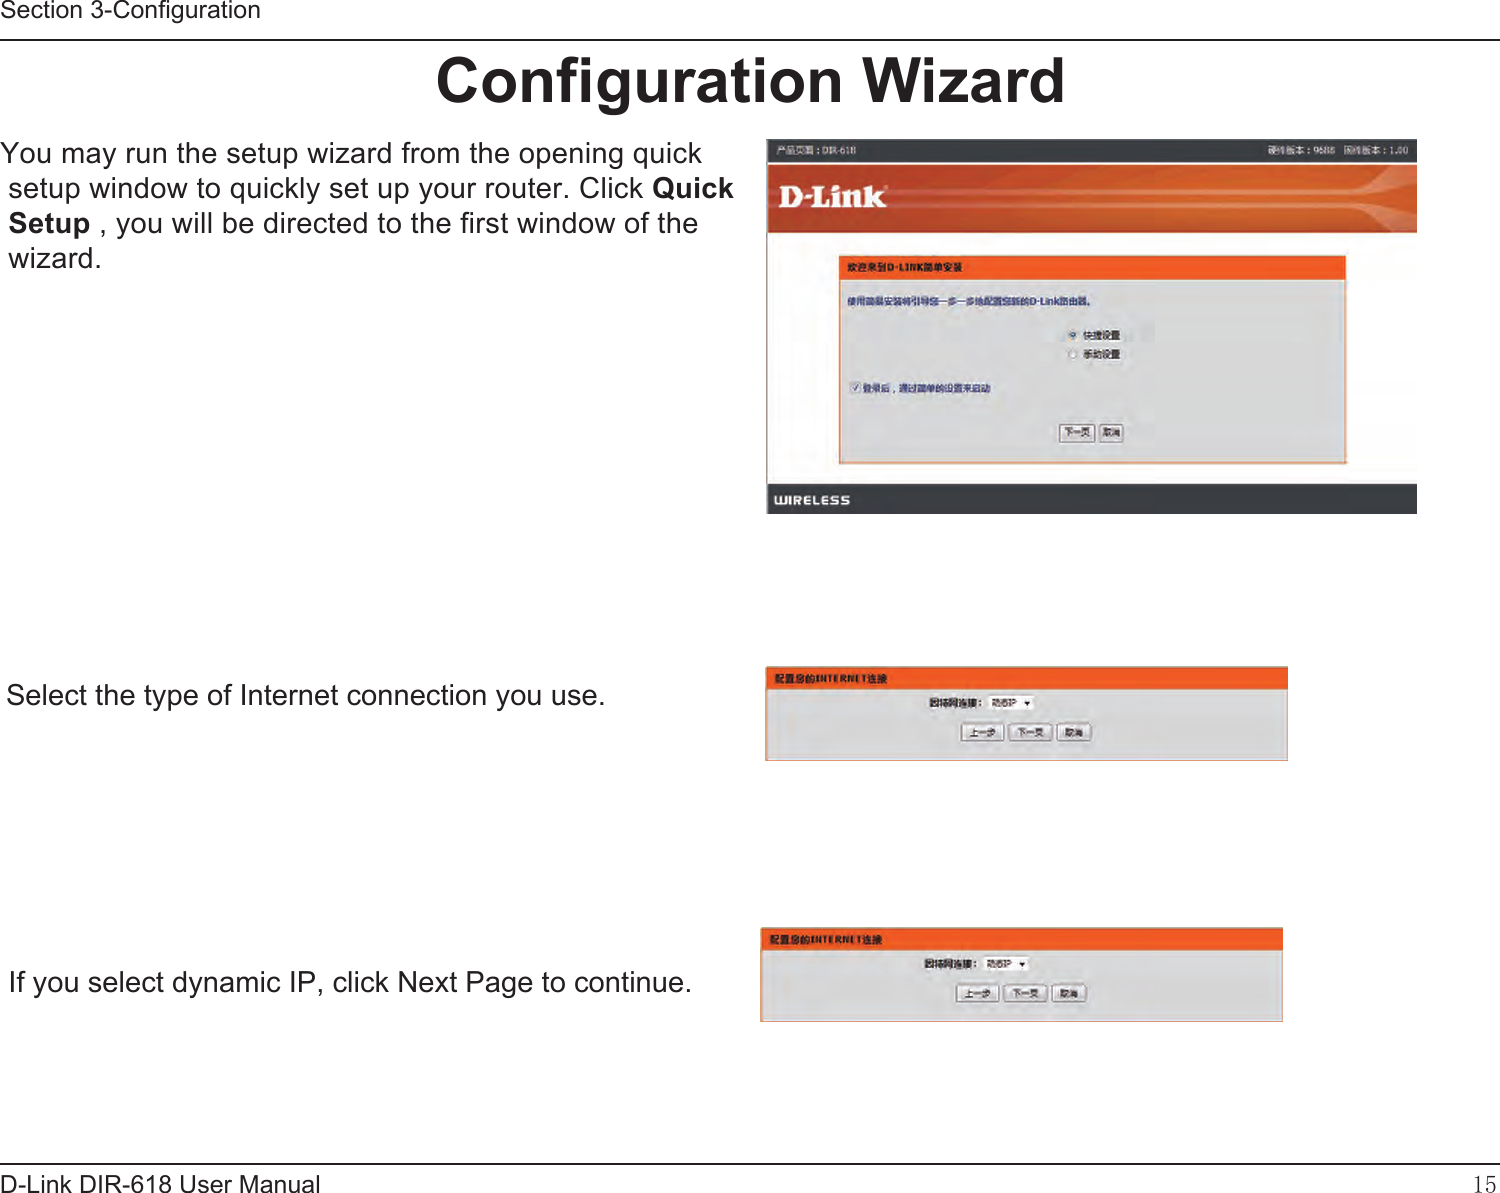 15D-Link DIR-618 User ManualSection 3-ConfigurationYou may run the setup wizard from the opening quick setup window to quickly set up your router. Click Quick Setup , you will be directed to the first window of the  wizard.    Select the type of Internet connection you use. If you select dynamic IP, click Next Page to continue.Configuration Wizard 